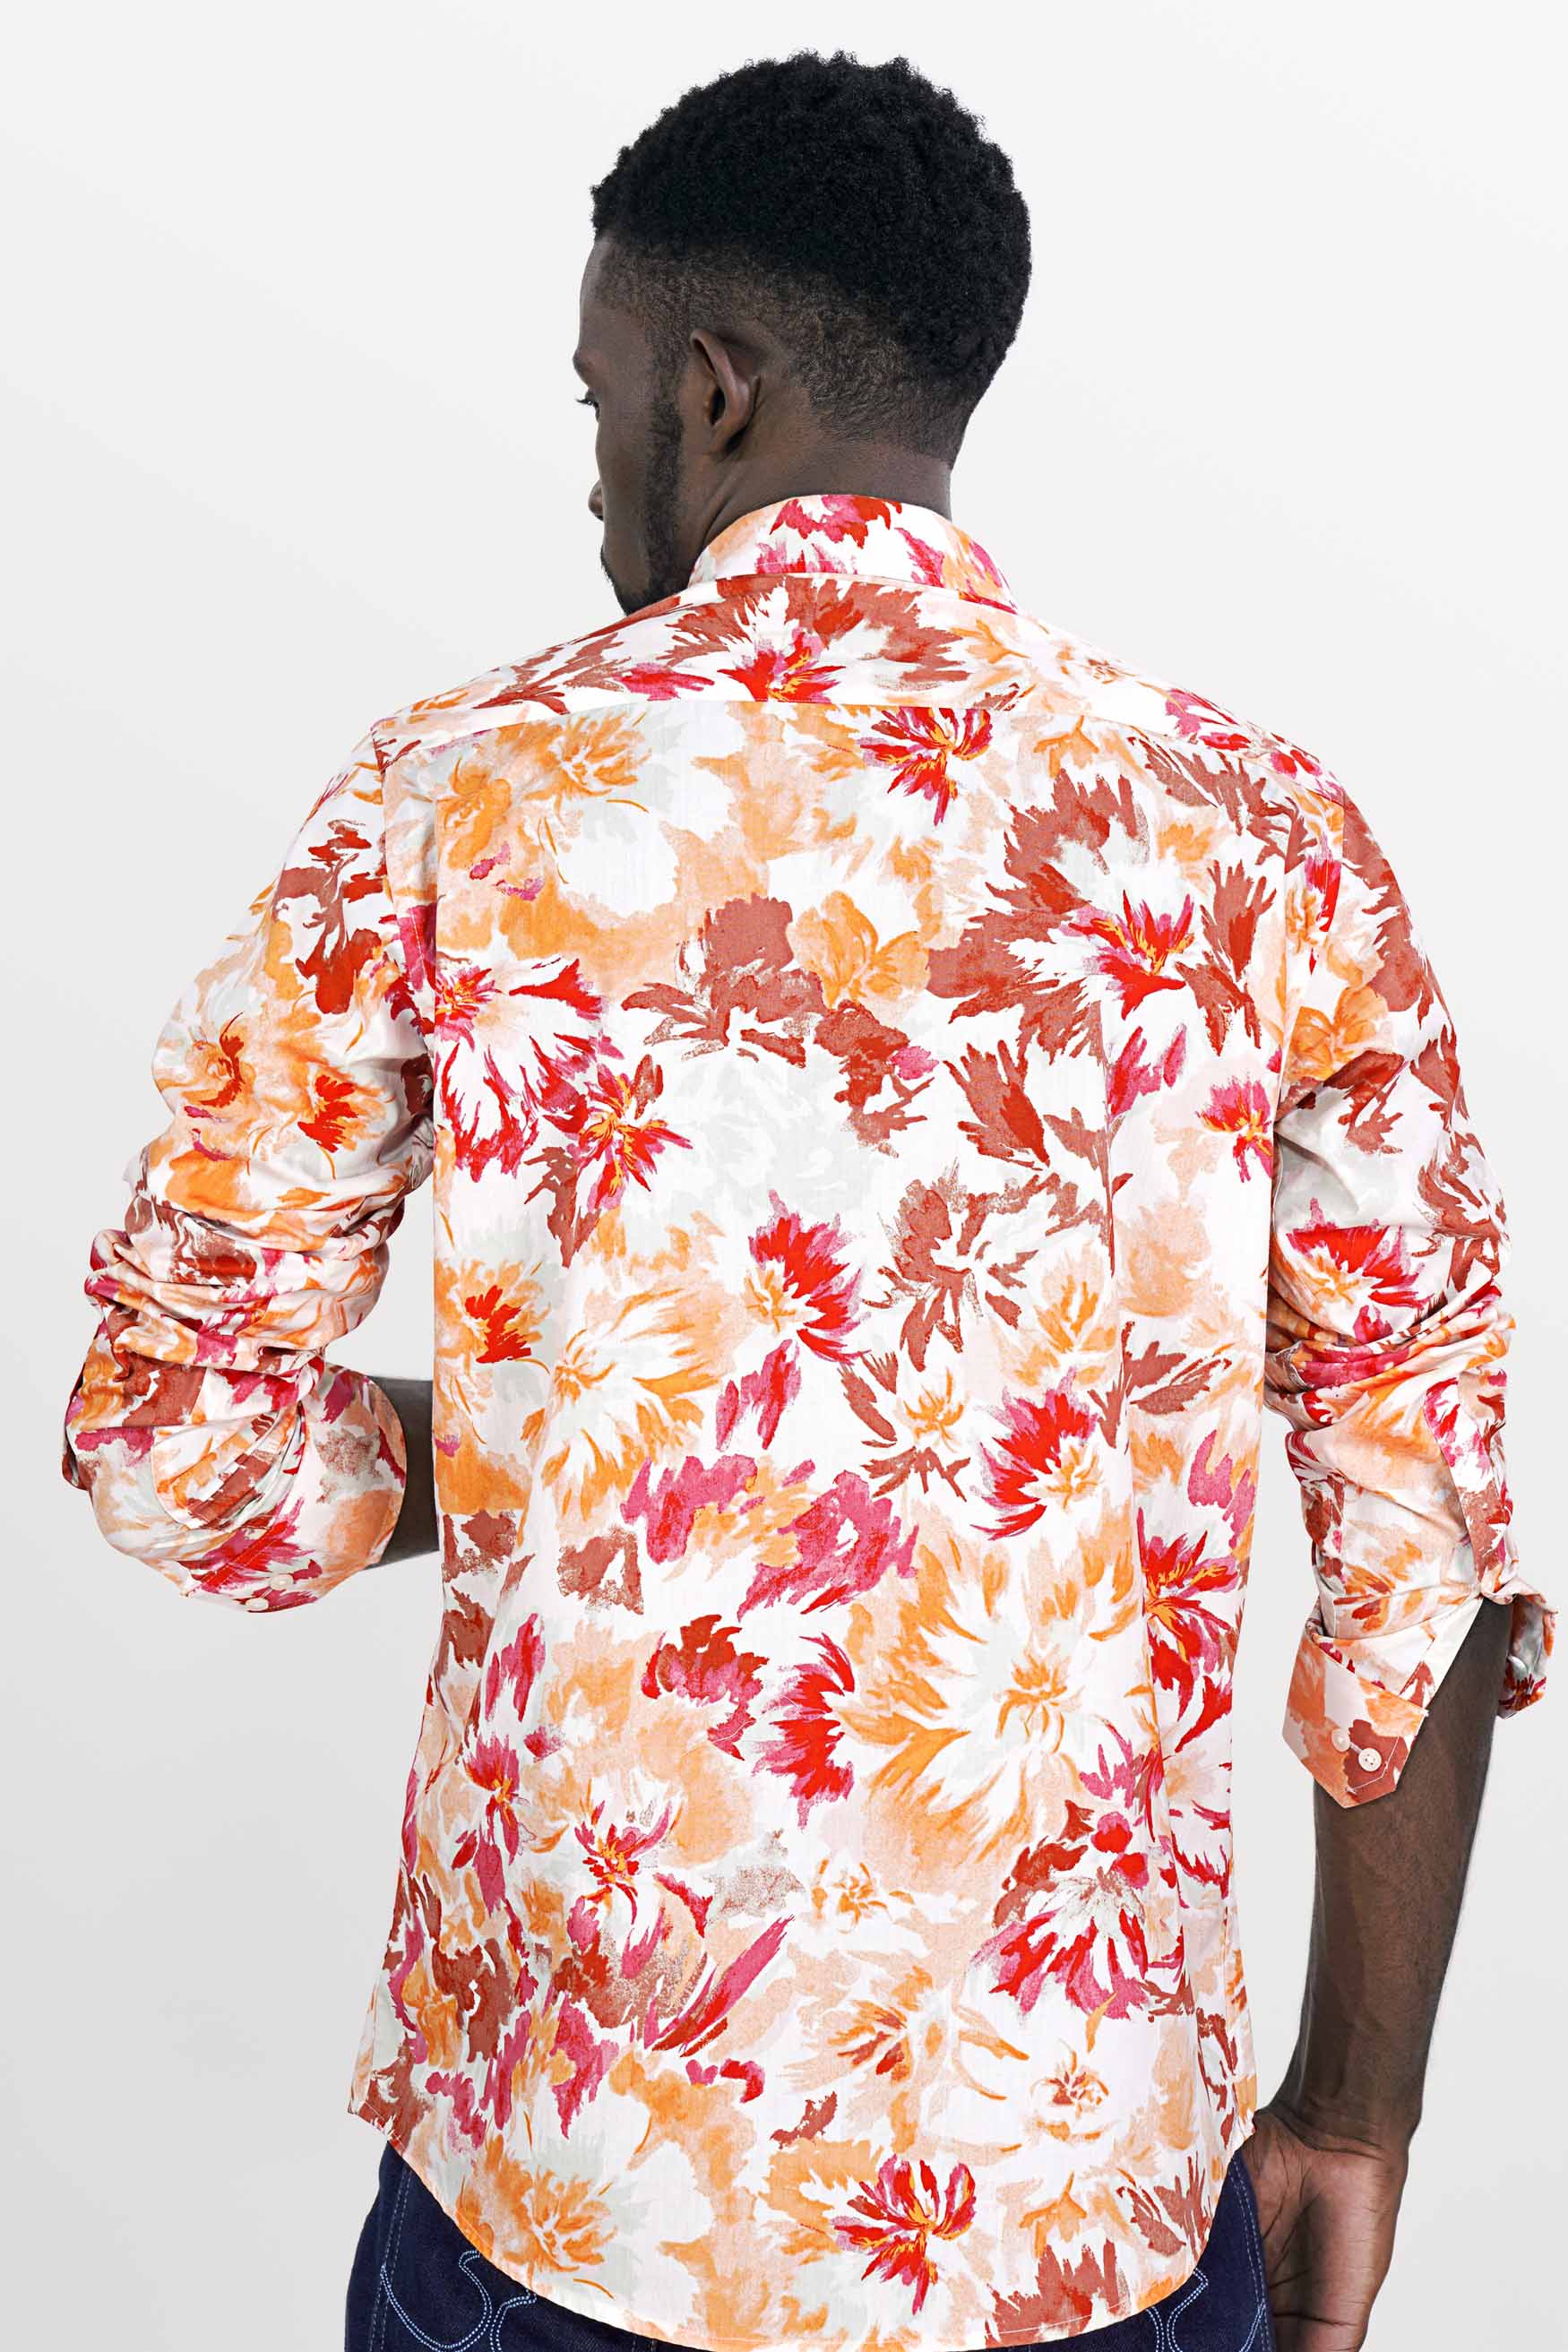 Bright White with Persimmon Red and Tangerine Brown Funky Printed Premium Cotton Designer Shirt 8073-RPRT70-38, 8073-RPRT70-H-38, 8073-RPRT70-39, 8073-RPRT70-H-39, 8073-RPRT70-40, 8073-RPRT70-H-40, 8073-RPRT70-42, 8073-RPRT70-H-42, 8073-RPRT70-44, 8073-RPRT70-H-44, 8073-RPRT70-46, 8073-RPRT70-H-46, 8073-RPRT70-48, 8073-RPRT70-H-48, 8073-RPRT70-50, 8073-RPRT70-H-50, 8073-RPRT70-52, 8073-RPRT70-H-52